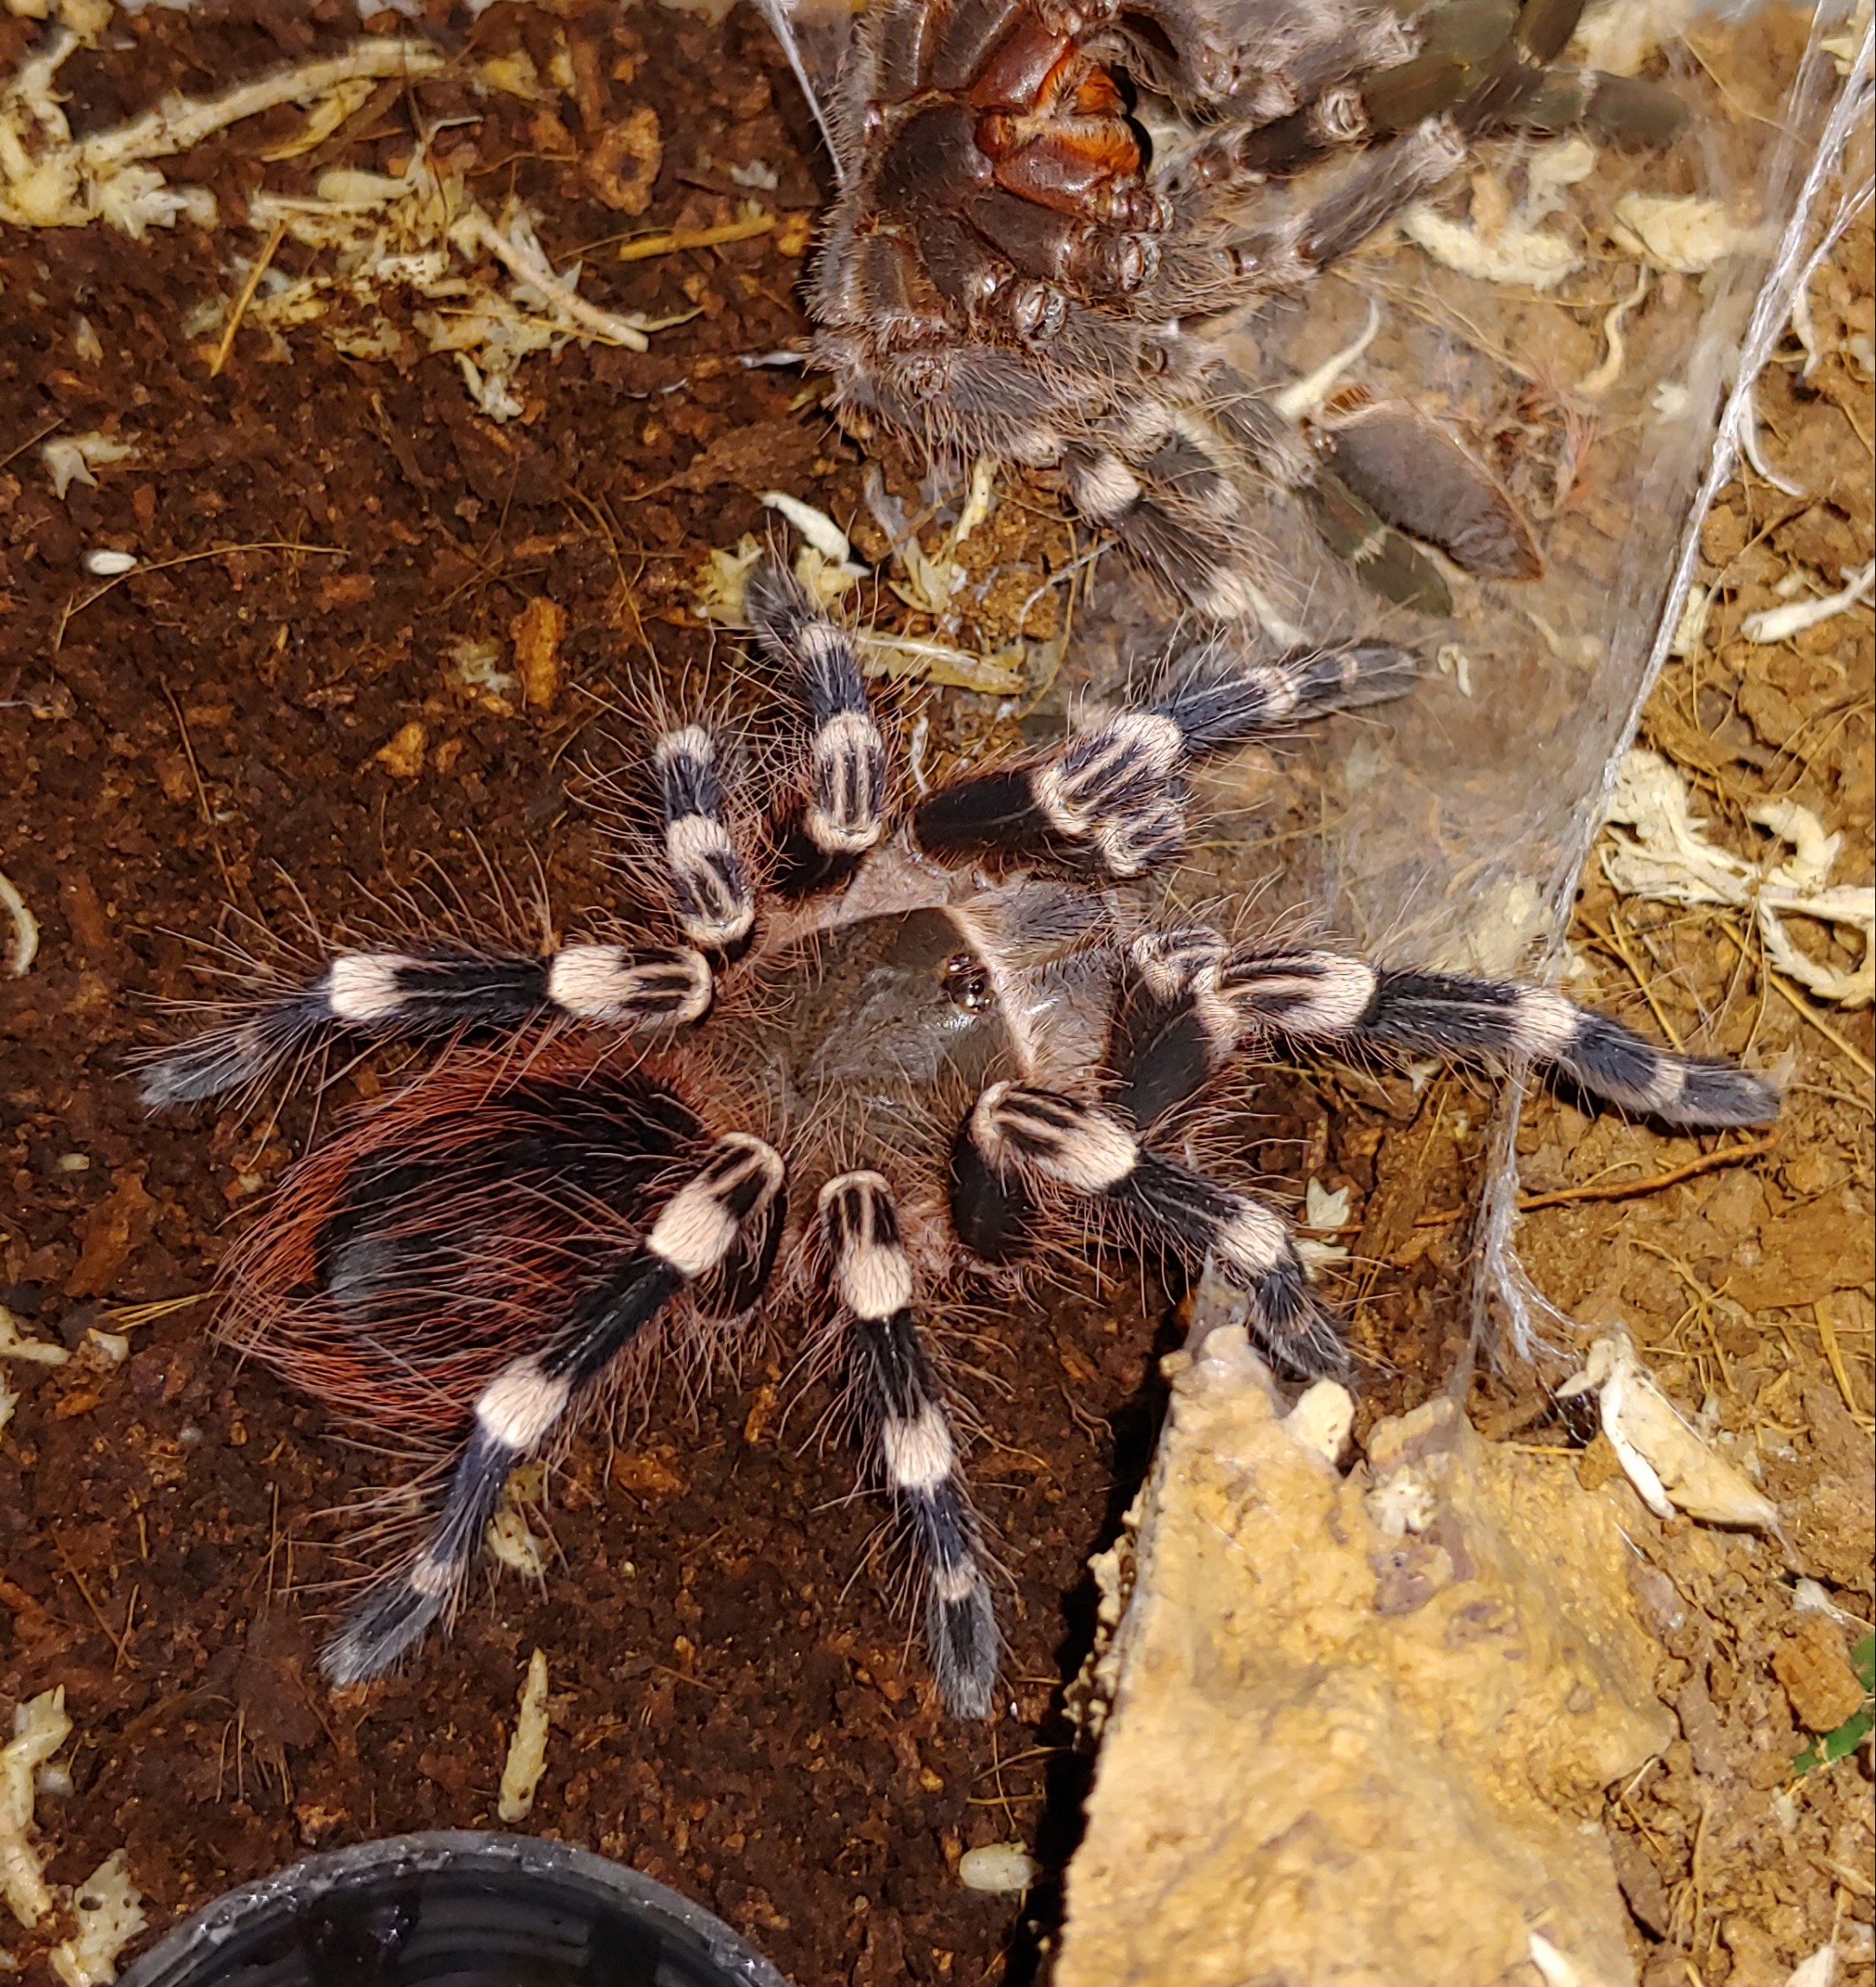 A.genic freshly molted